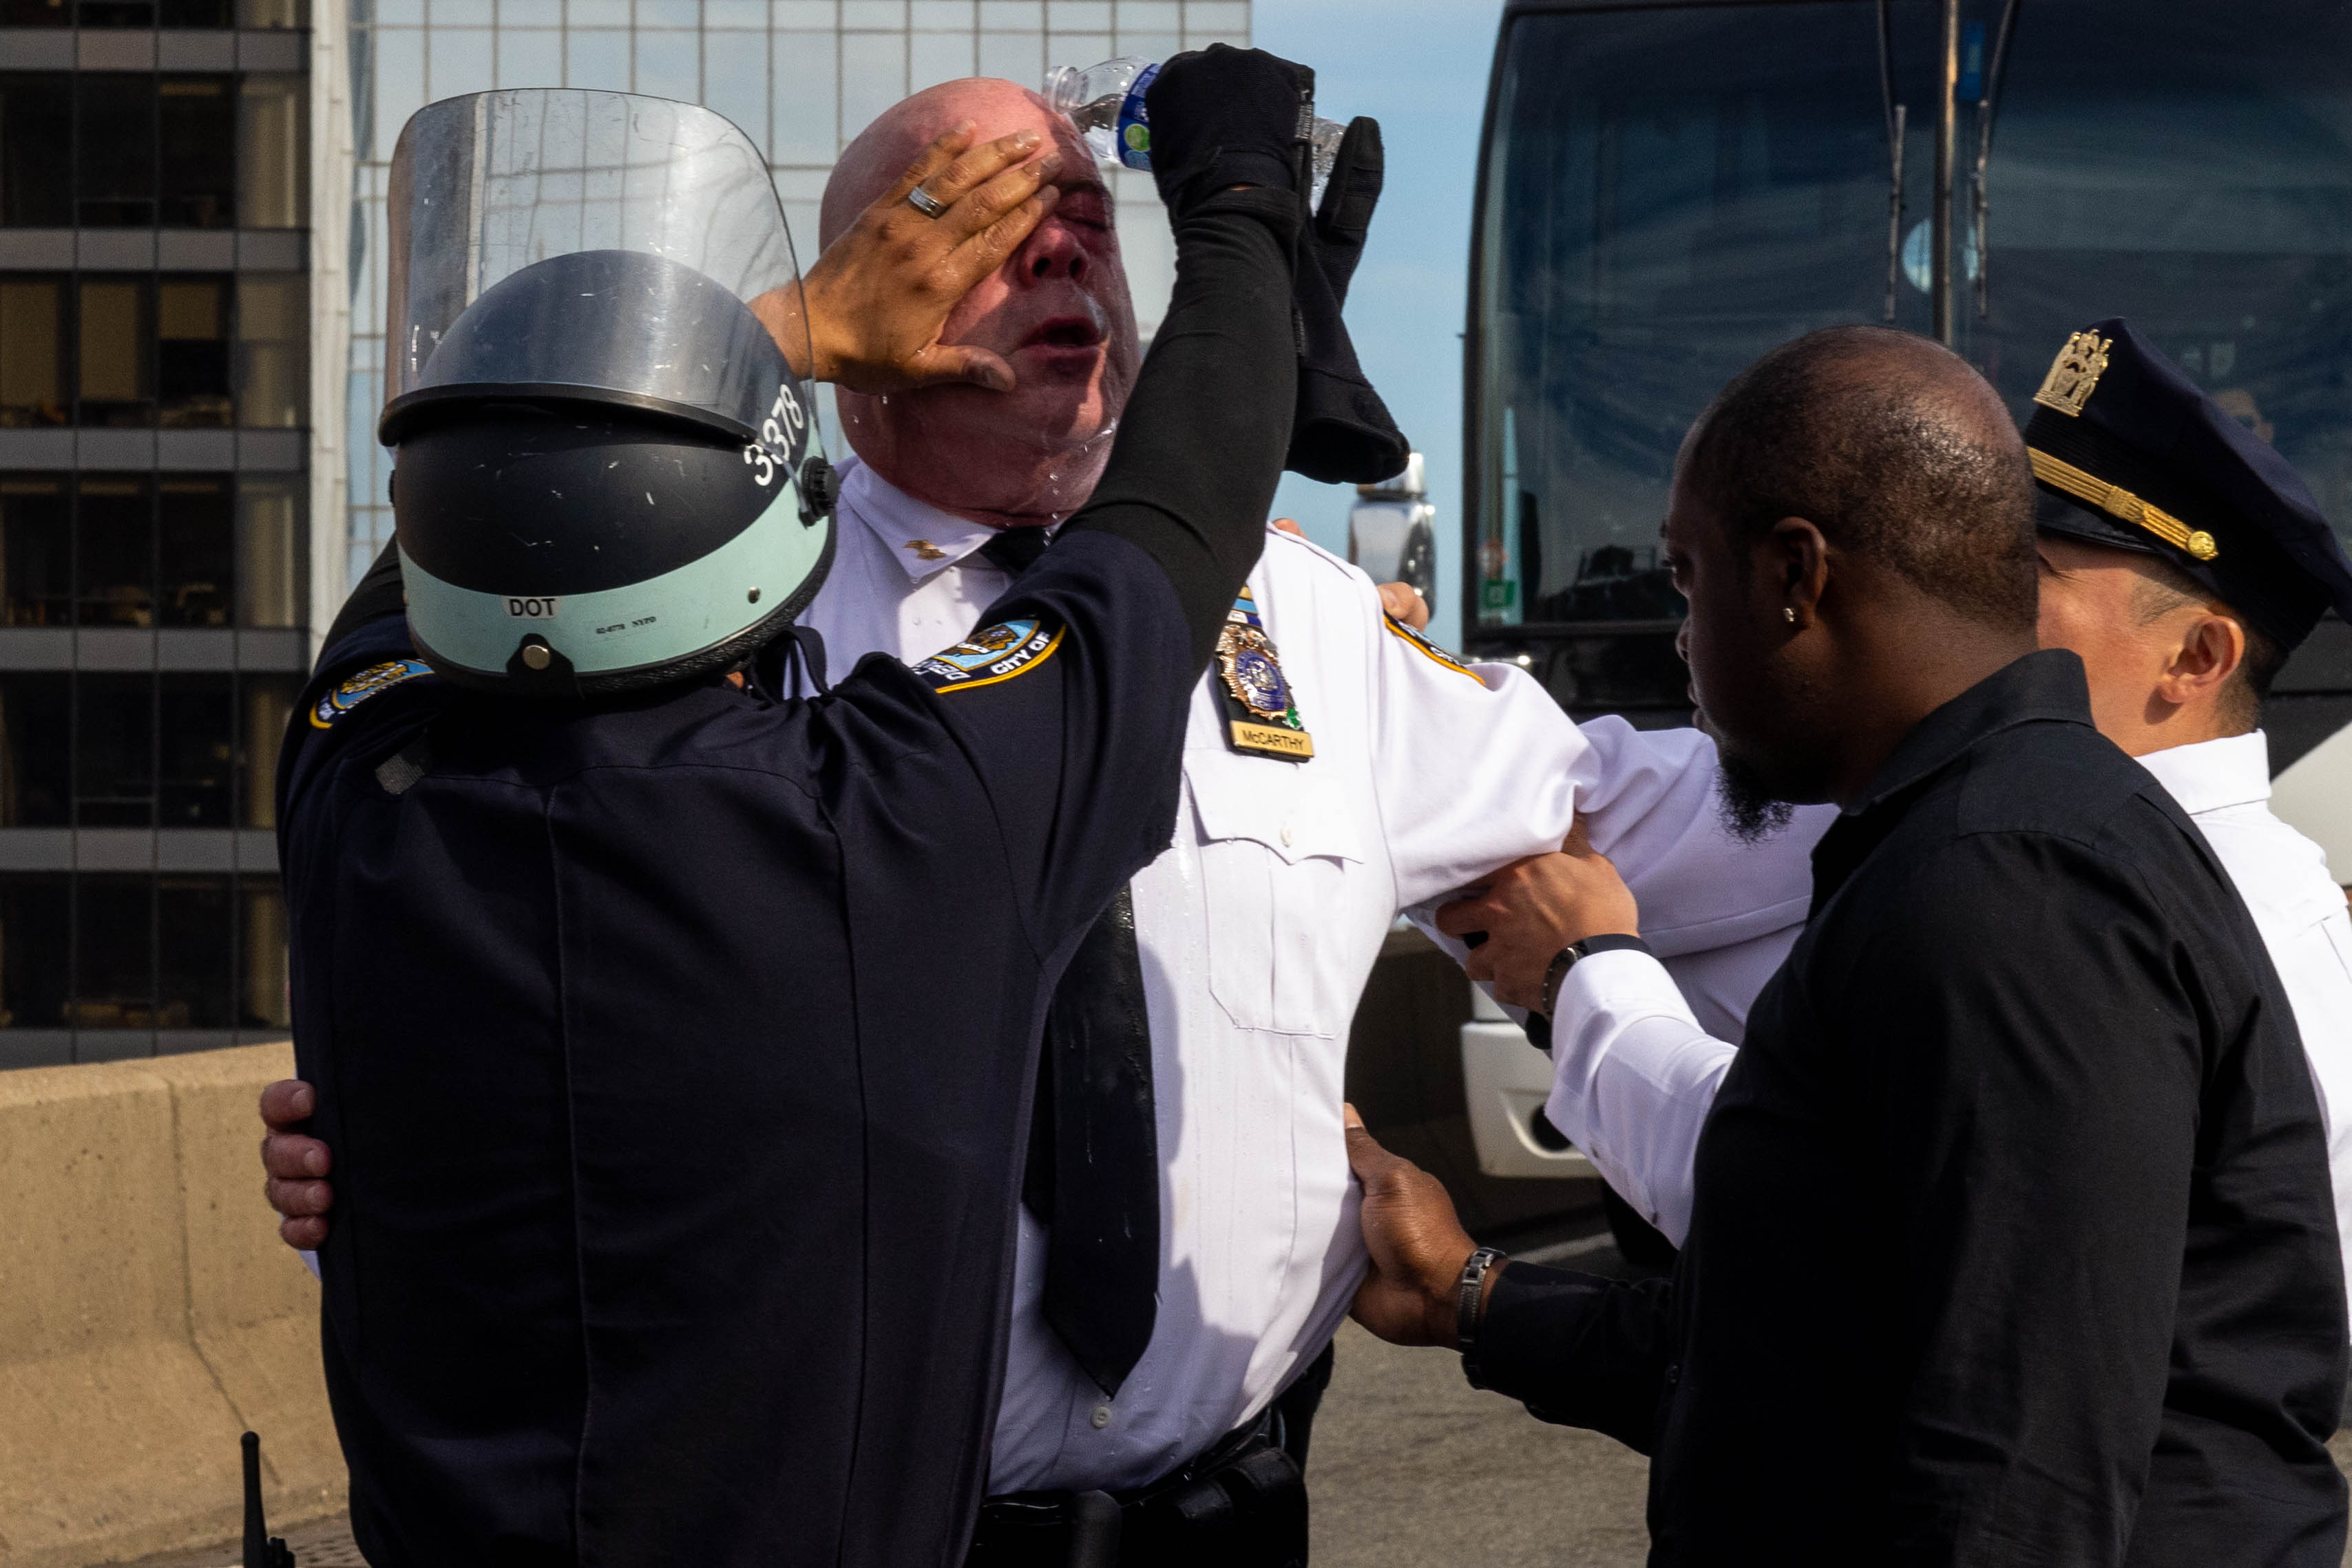 James McCarthy, NYPD assistant chief, is assisted after seemingly being affected by a chemical irritant as police arrest pro-Palestinian demonstrators blocking traffic on the Manhattan Bridge